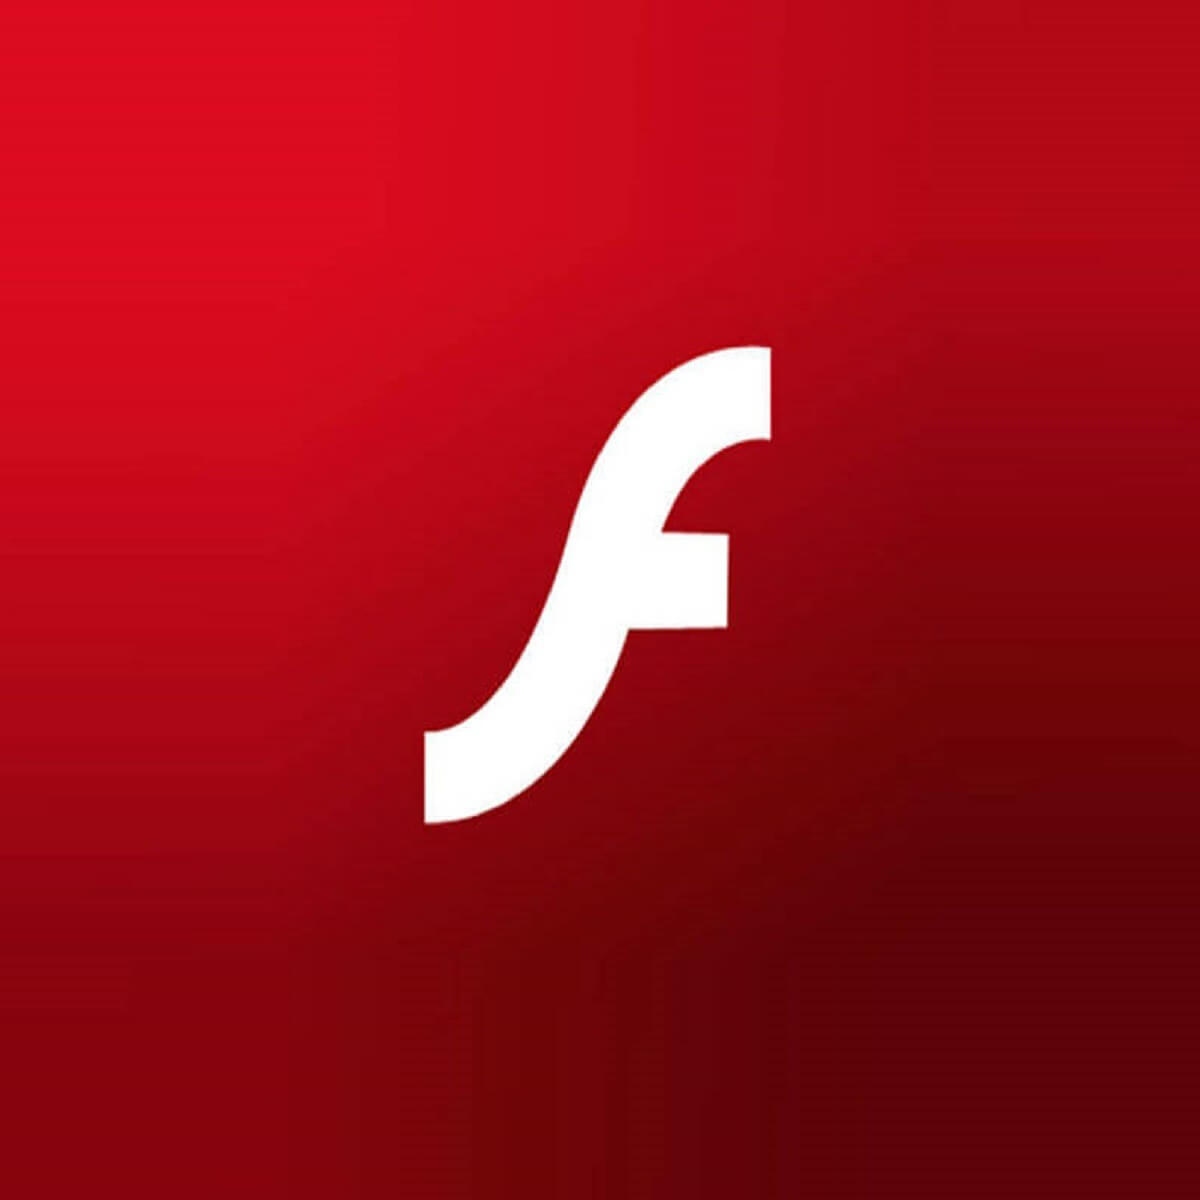 Microsoft removes Flash from Microsoft Edge and Internet Explorer